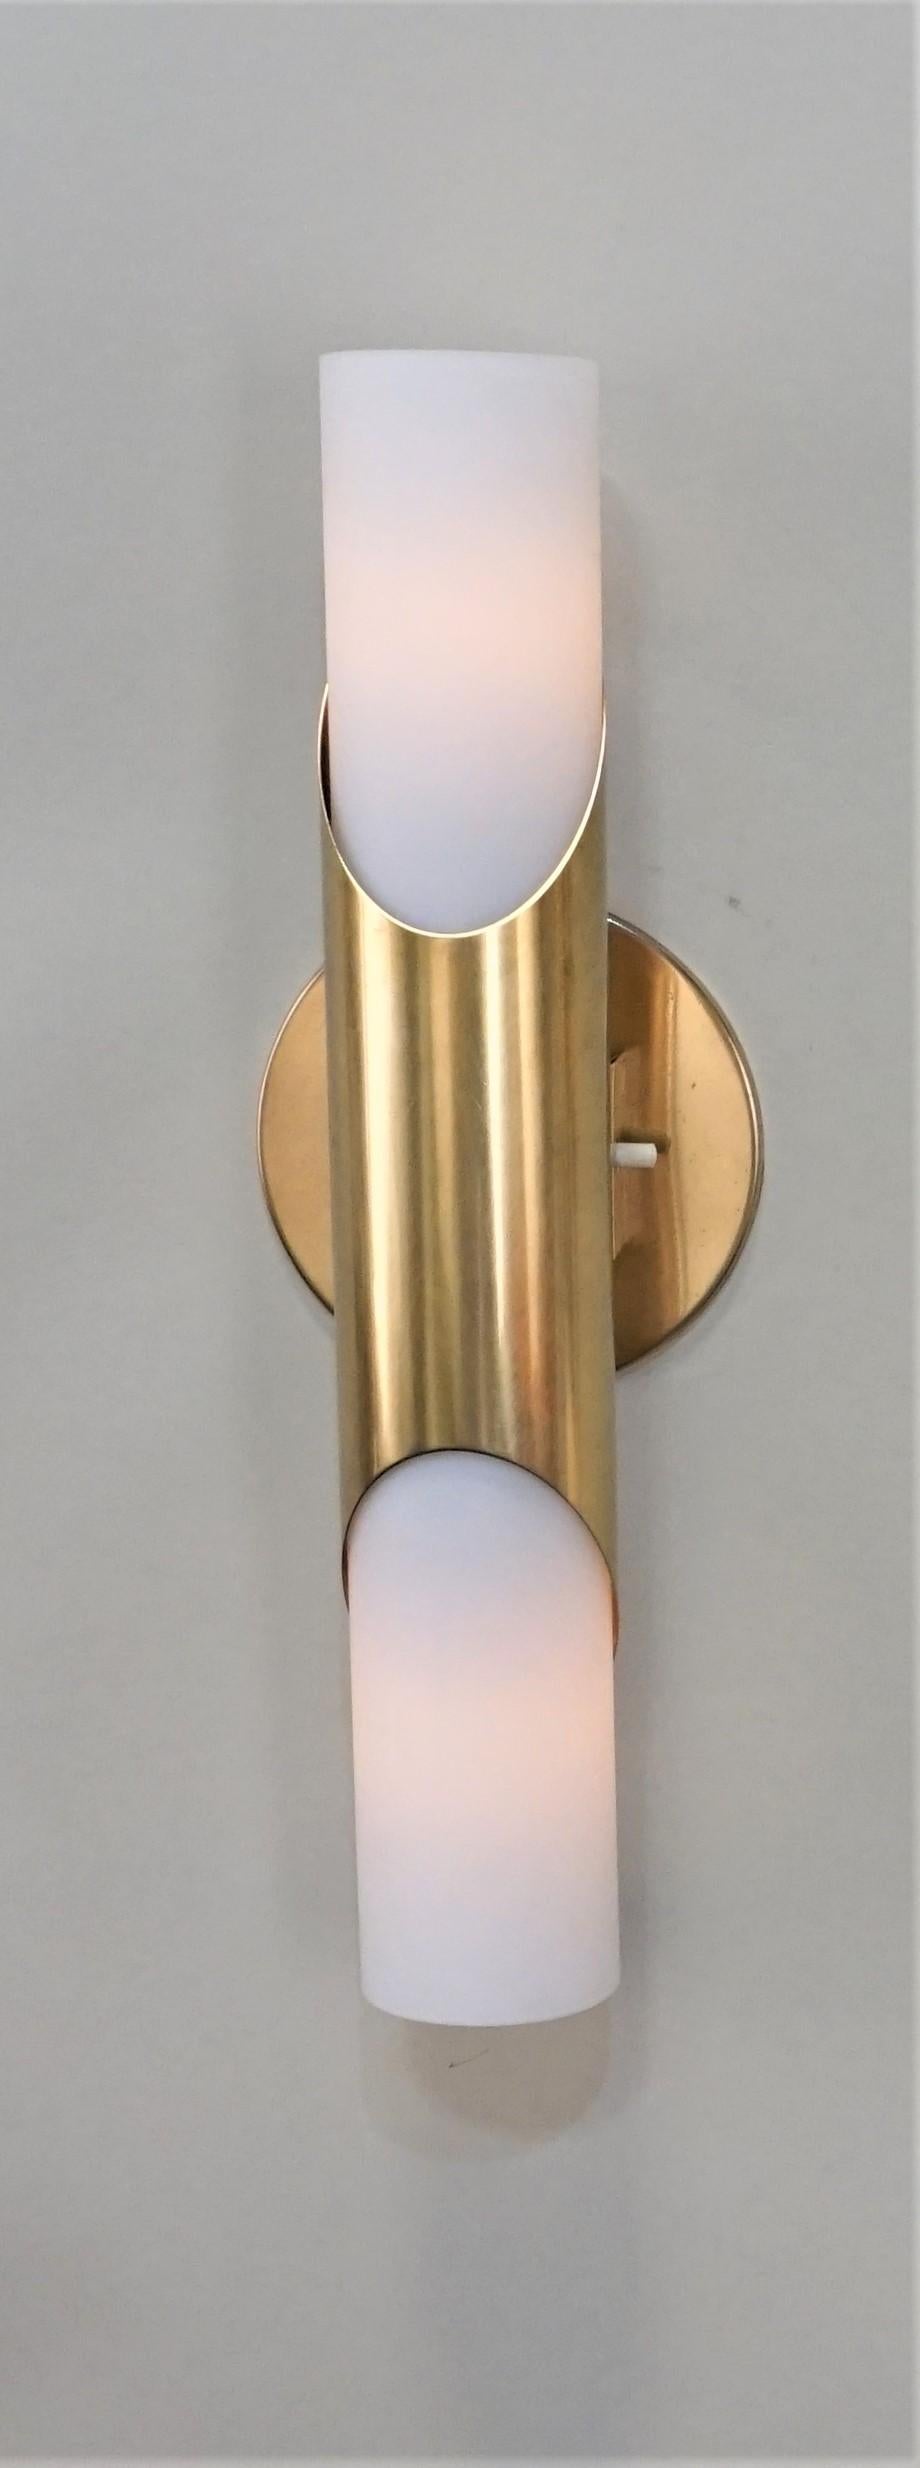 Bronze Pair of Wall Sconces or Wall Lights in the Style of RAAK, Amsterdam, 1970